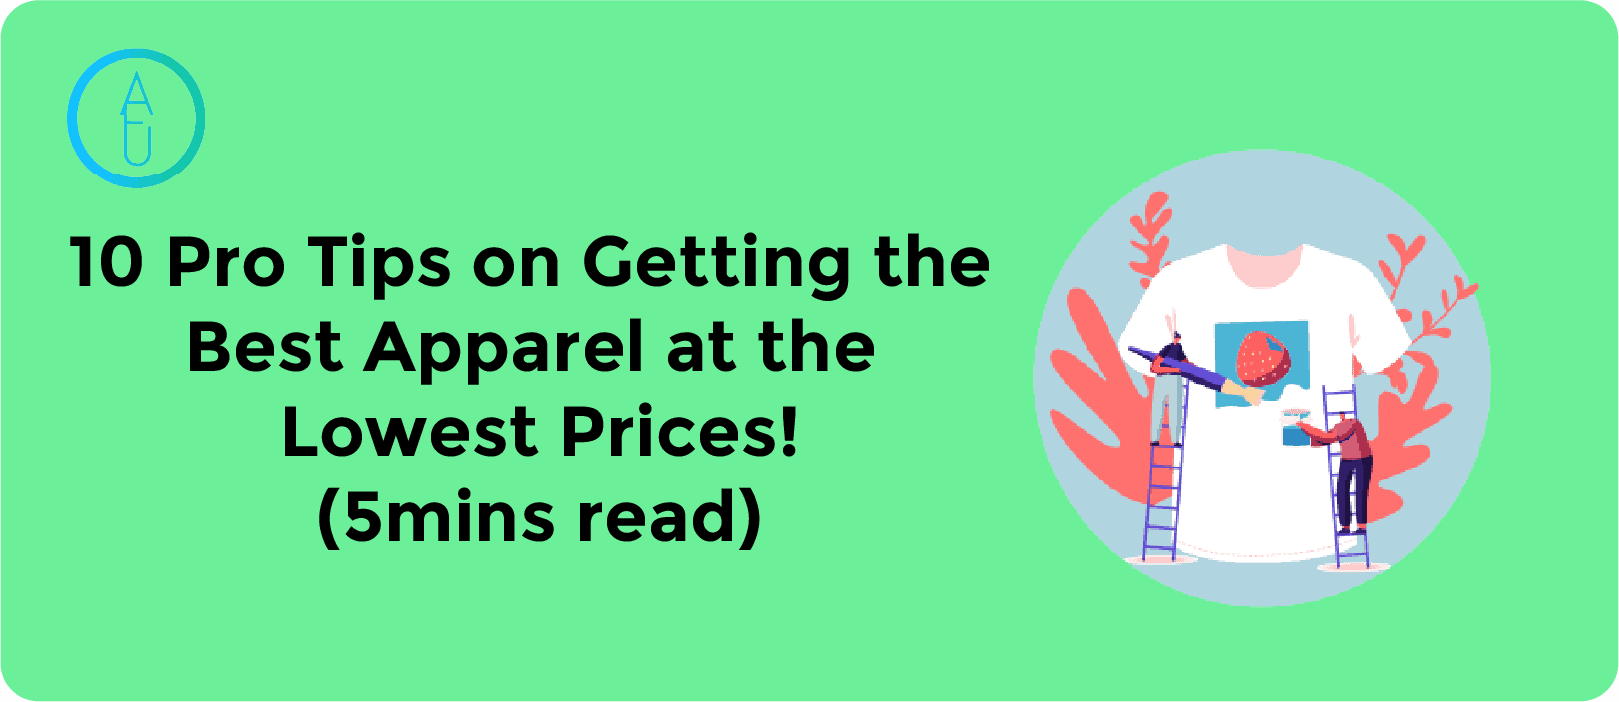 10 Pro Tips on Getting the Best Apparel at the Lowest Prices​